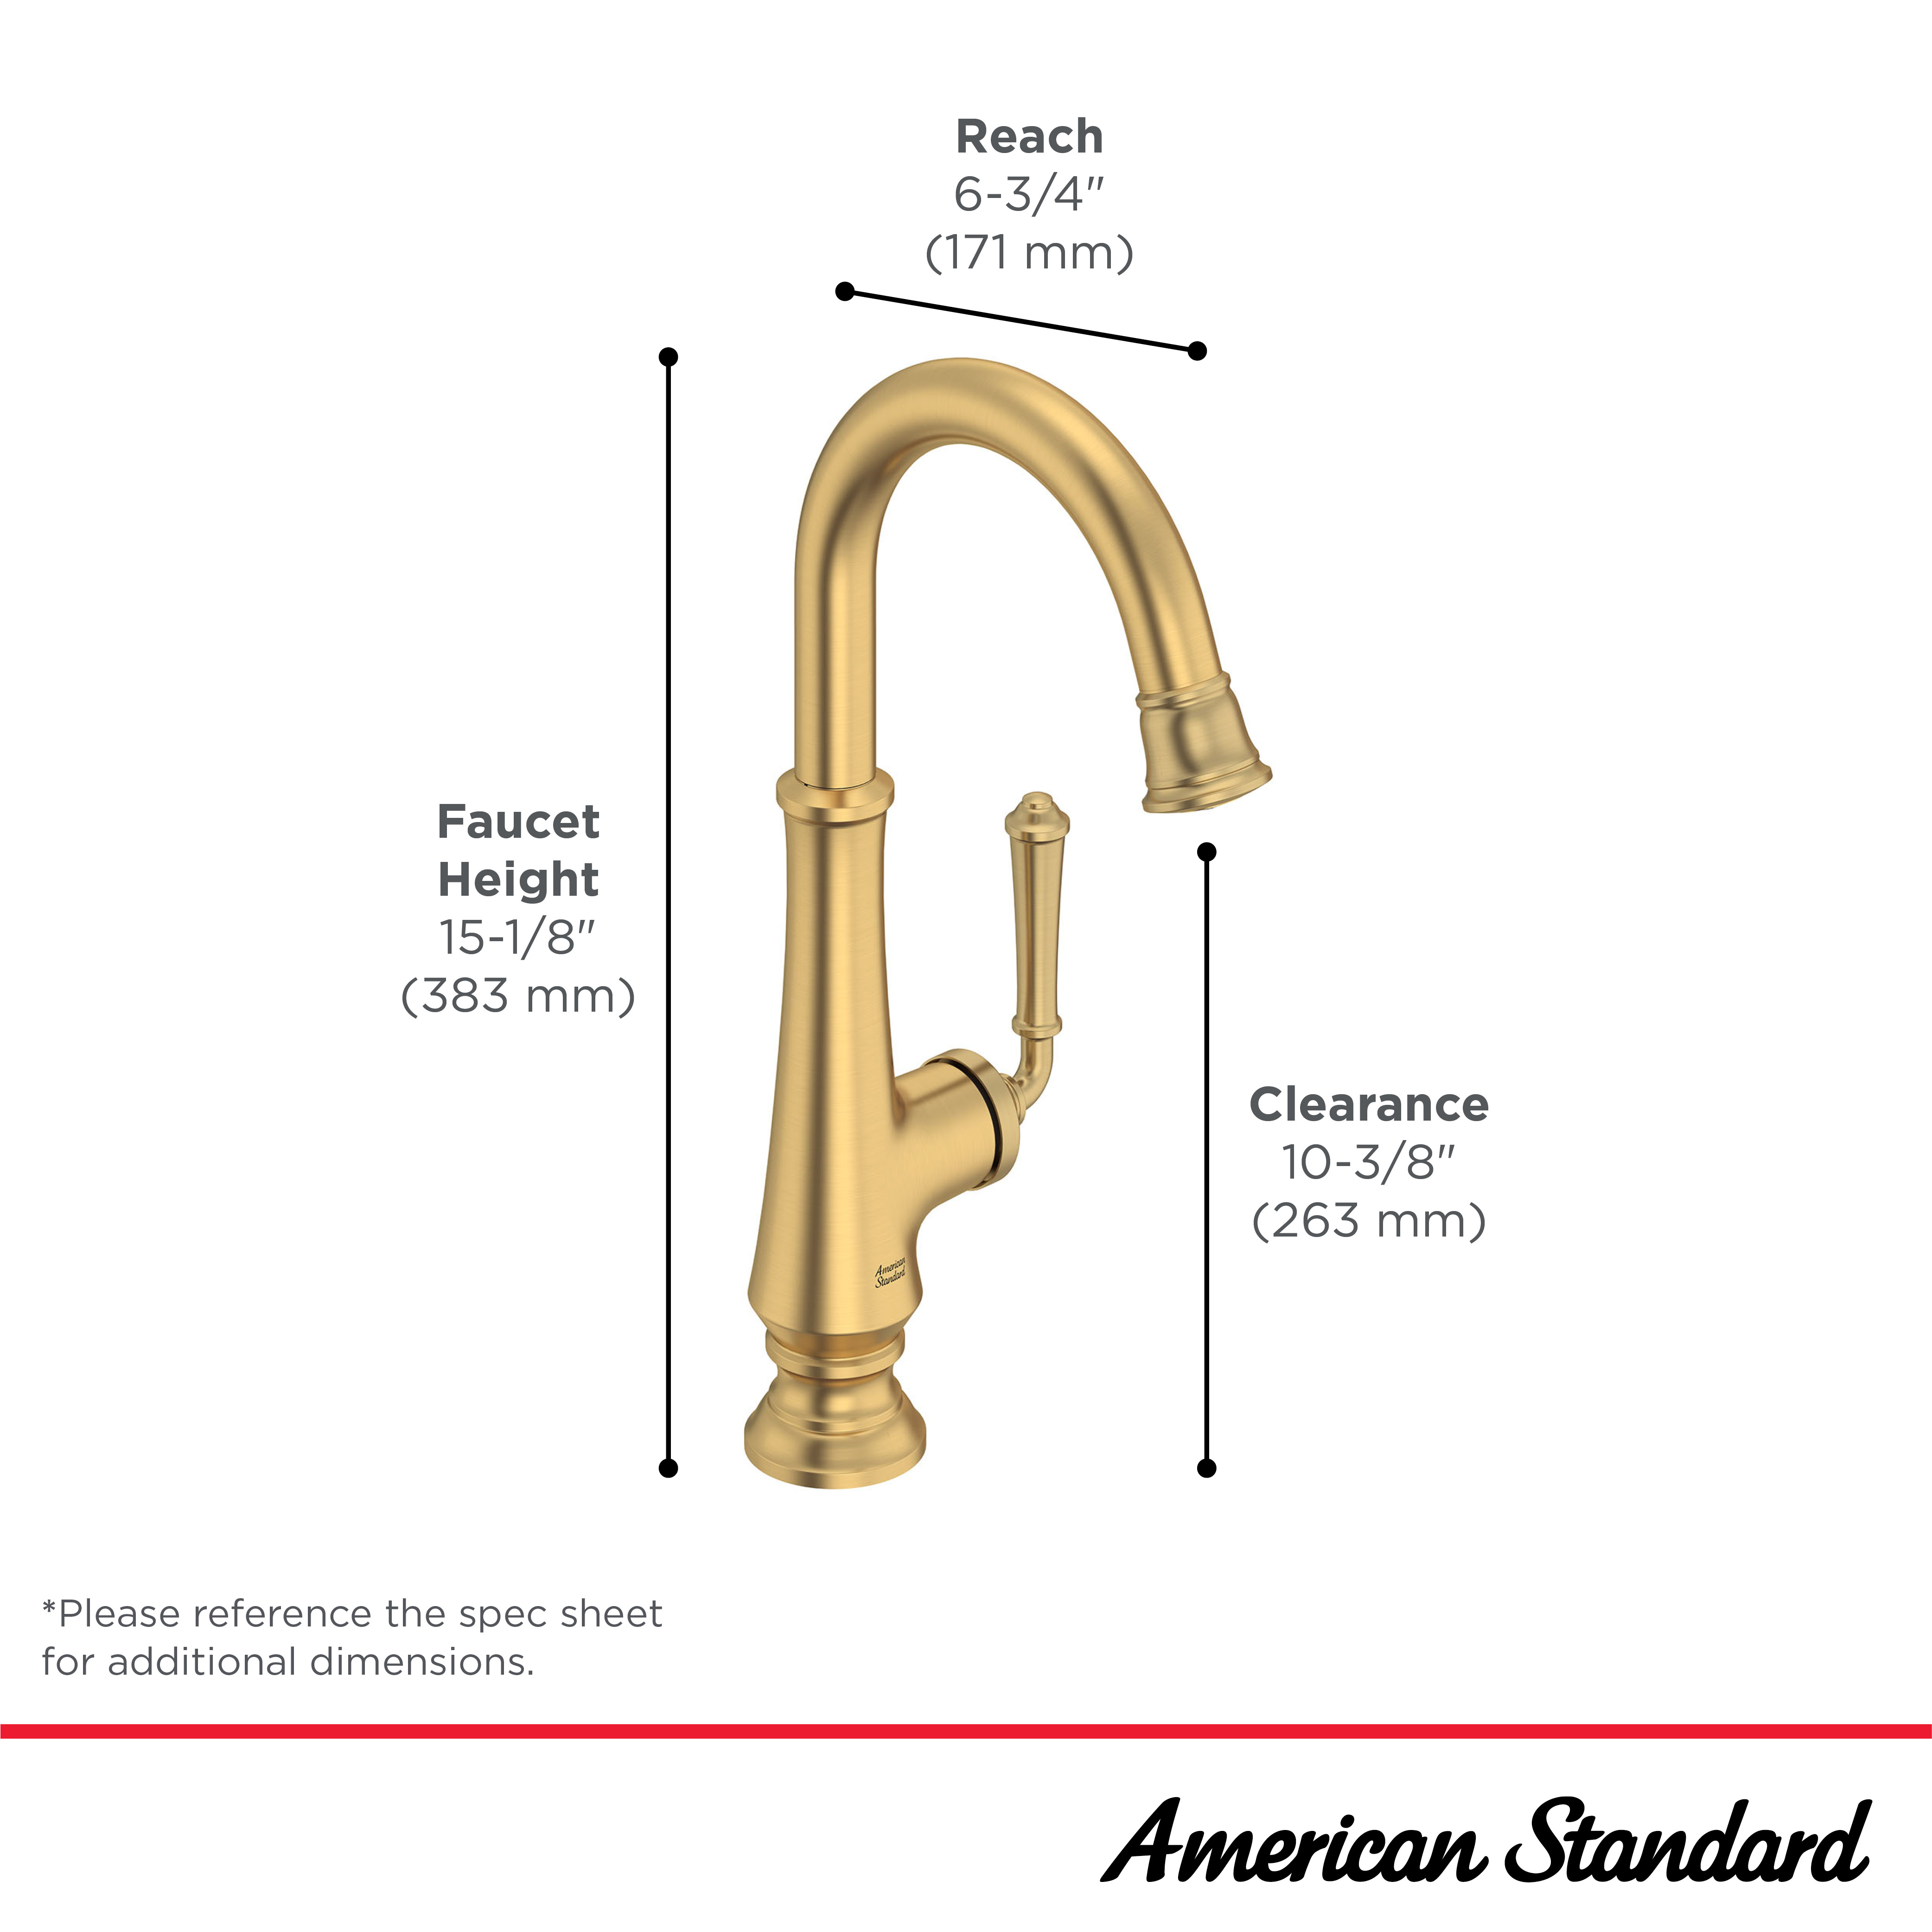 Delancey® Single-Handle Pull-Down Bar Faucet 1.5 gpm/5.7 L/min